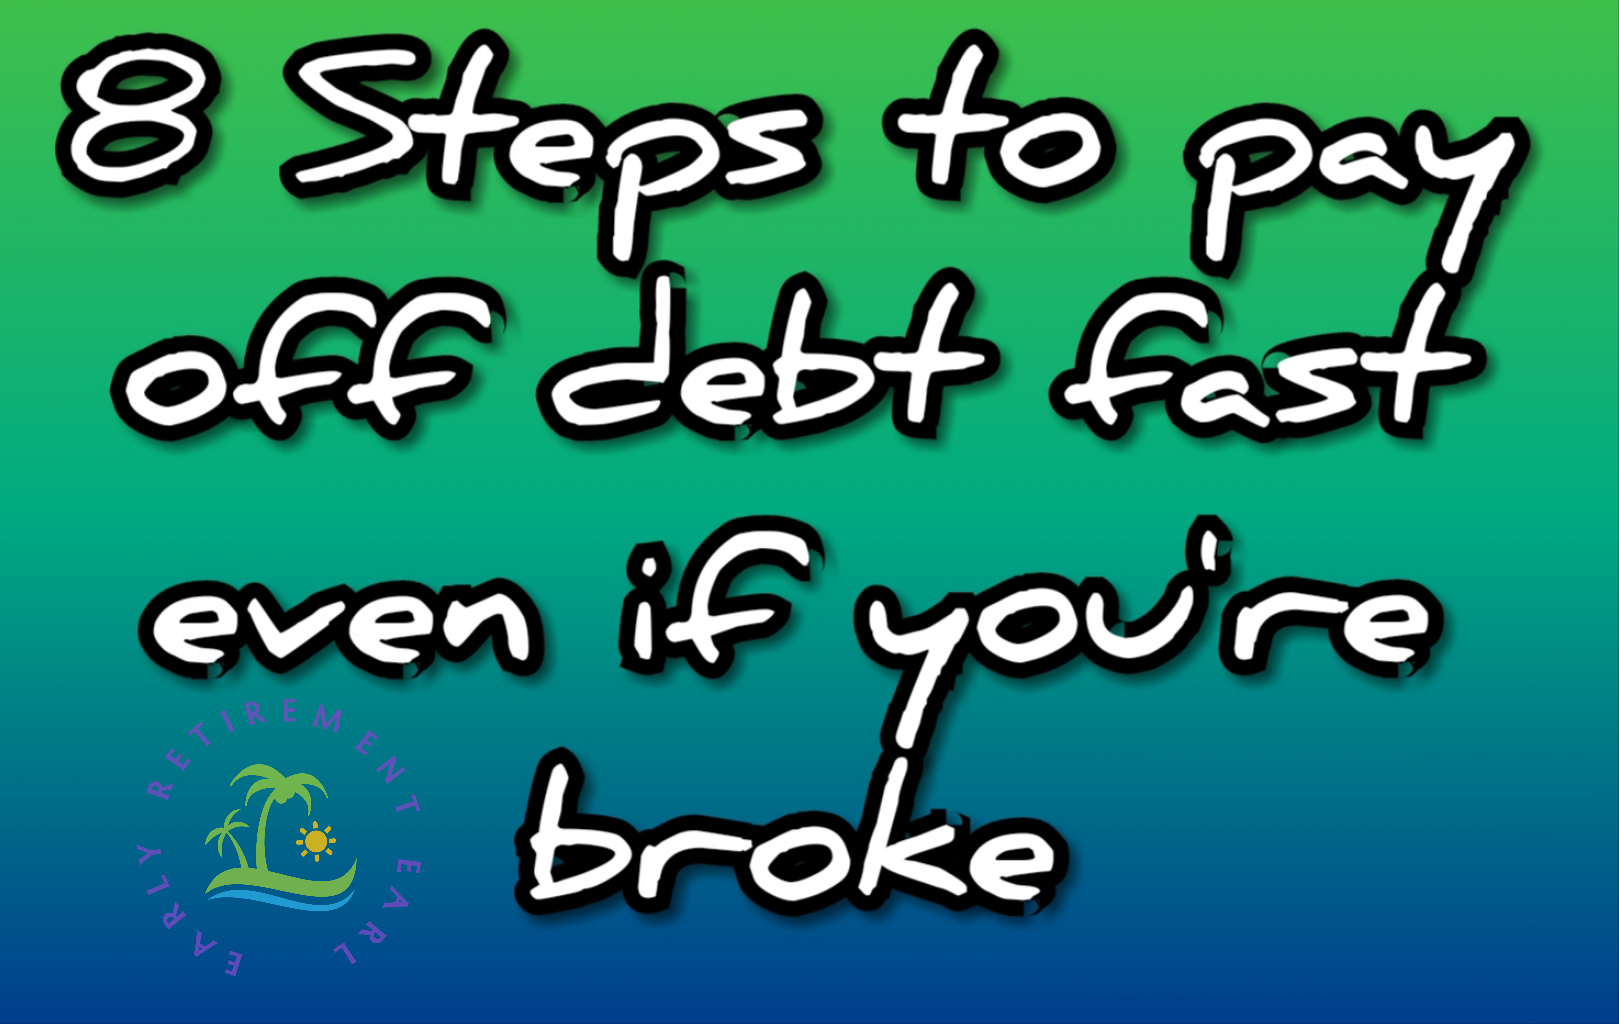 How to get out of debt fast with no money